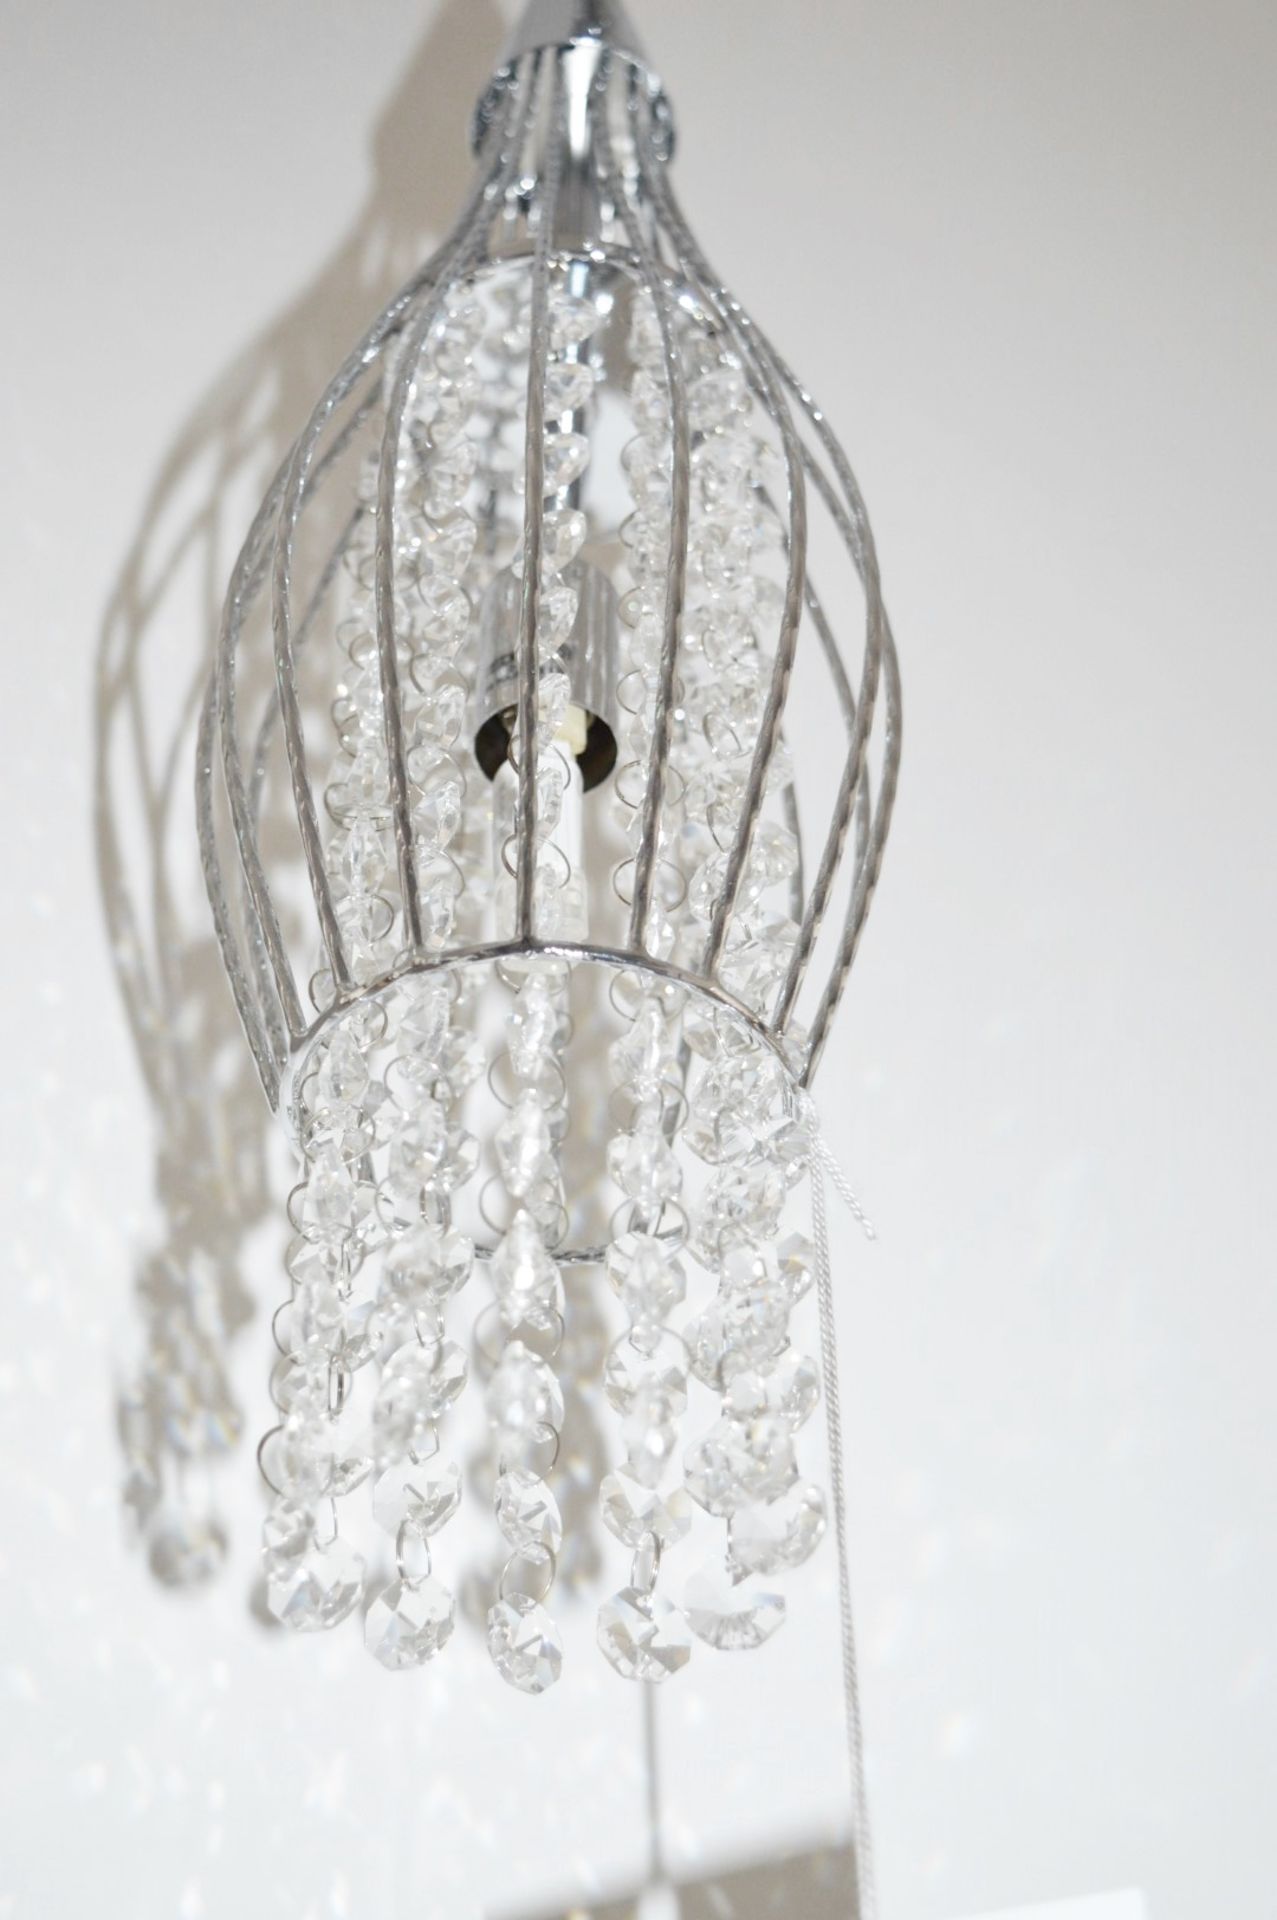 1 x Rocket Chrome 3-Light Cage Multi-drop Pendant Light With Clear Crystal Buttons - RRP £228.00 - Image 3 of 4